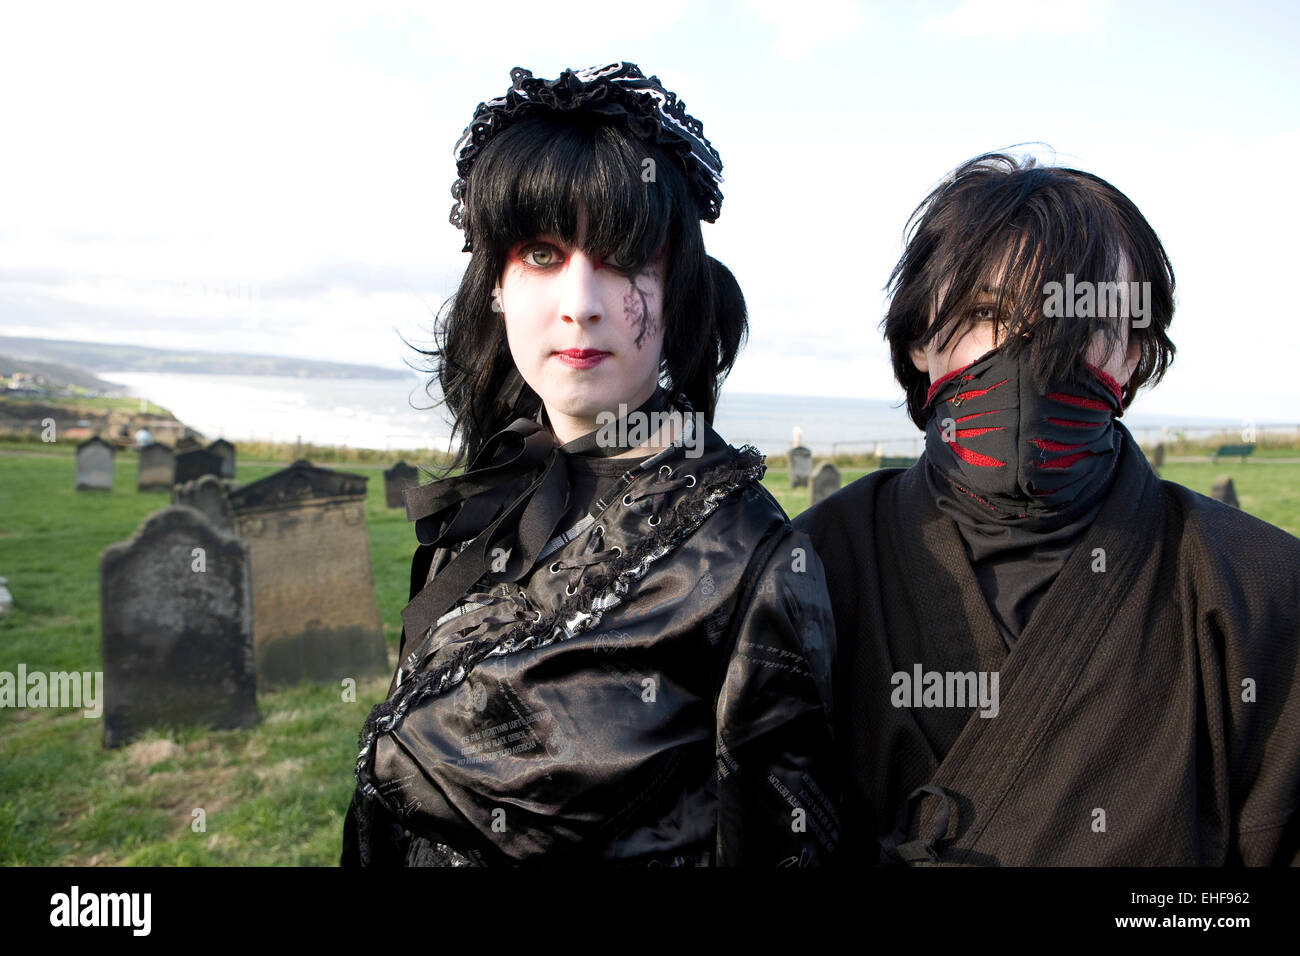 Young couple in Japanese style Gothic Lolita fashion at Whitby Goth Weekender. Stock Photo